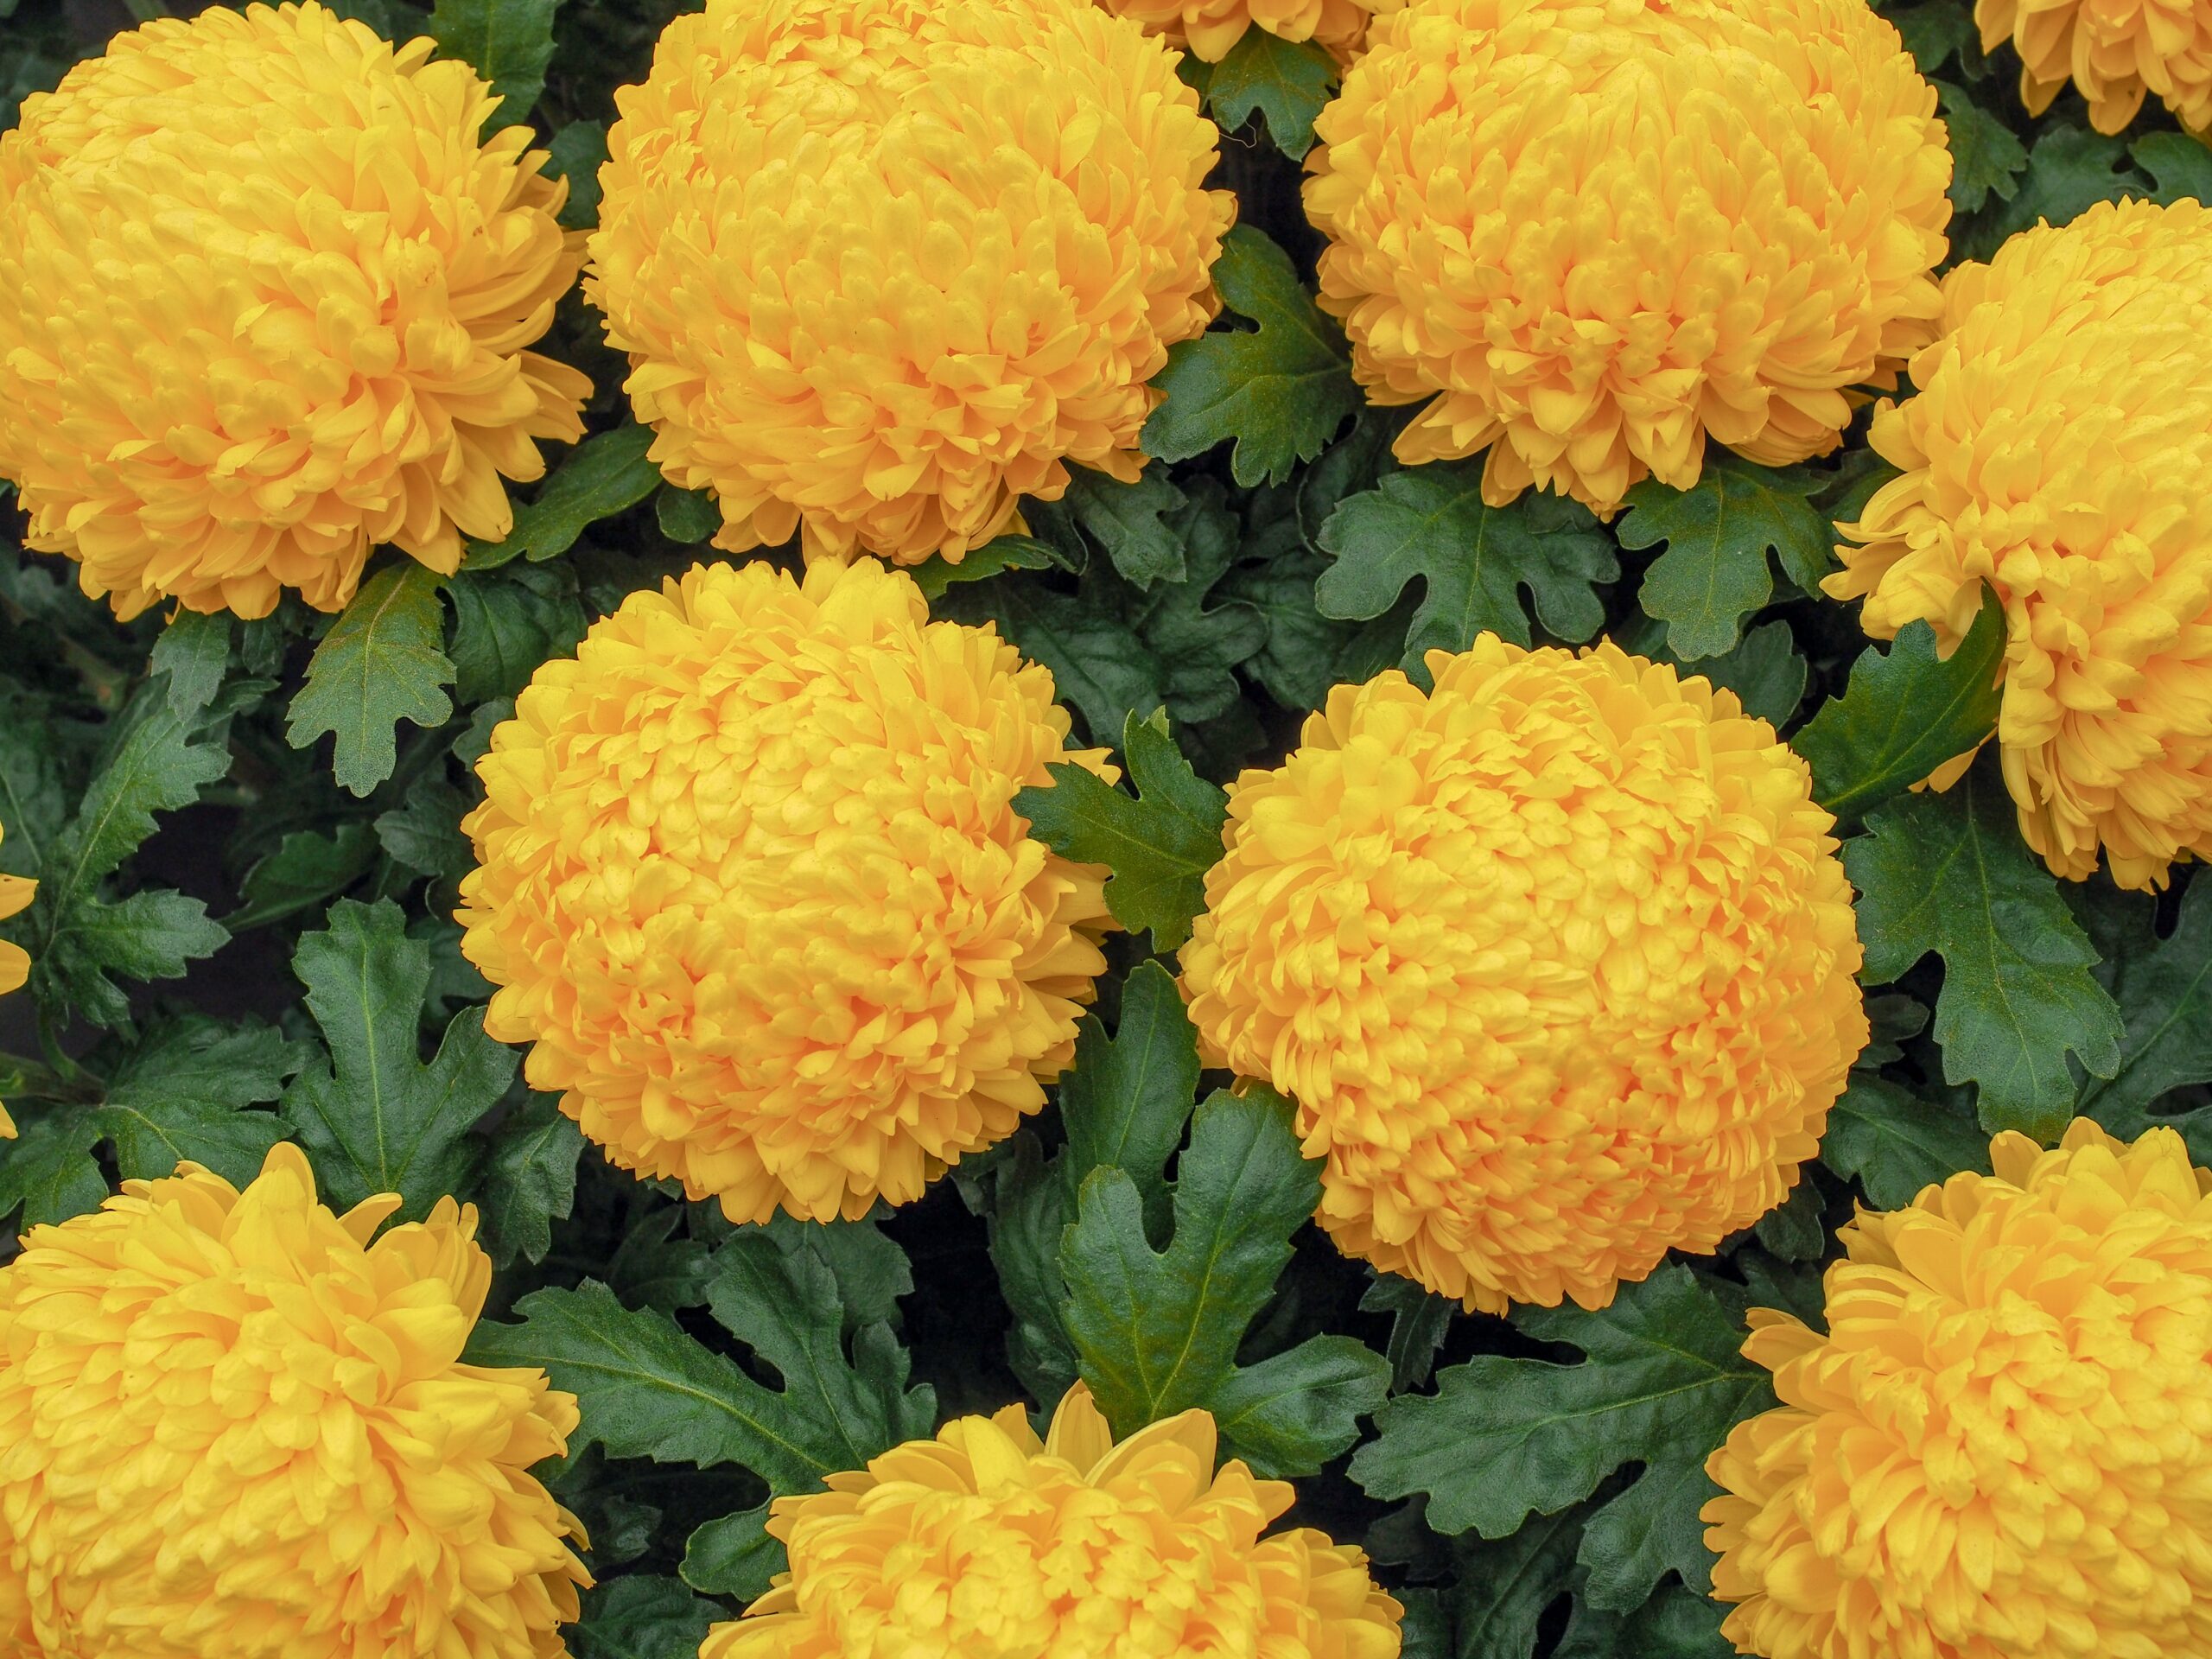 Chrysanthemum meaning and symbolism